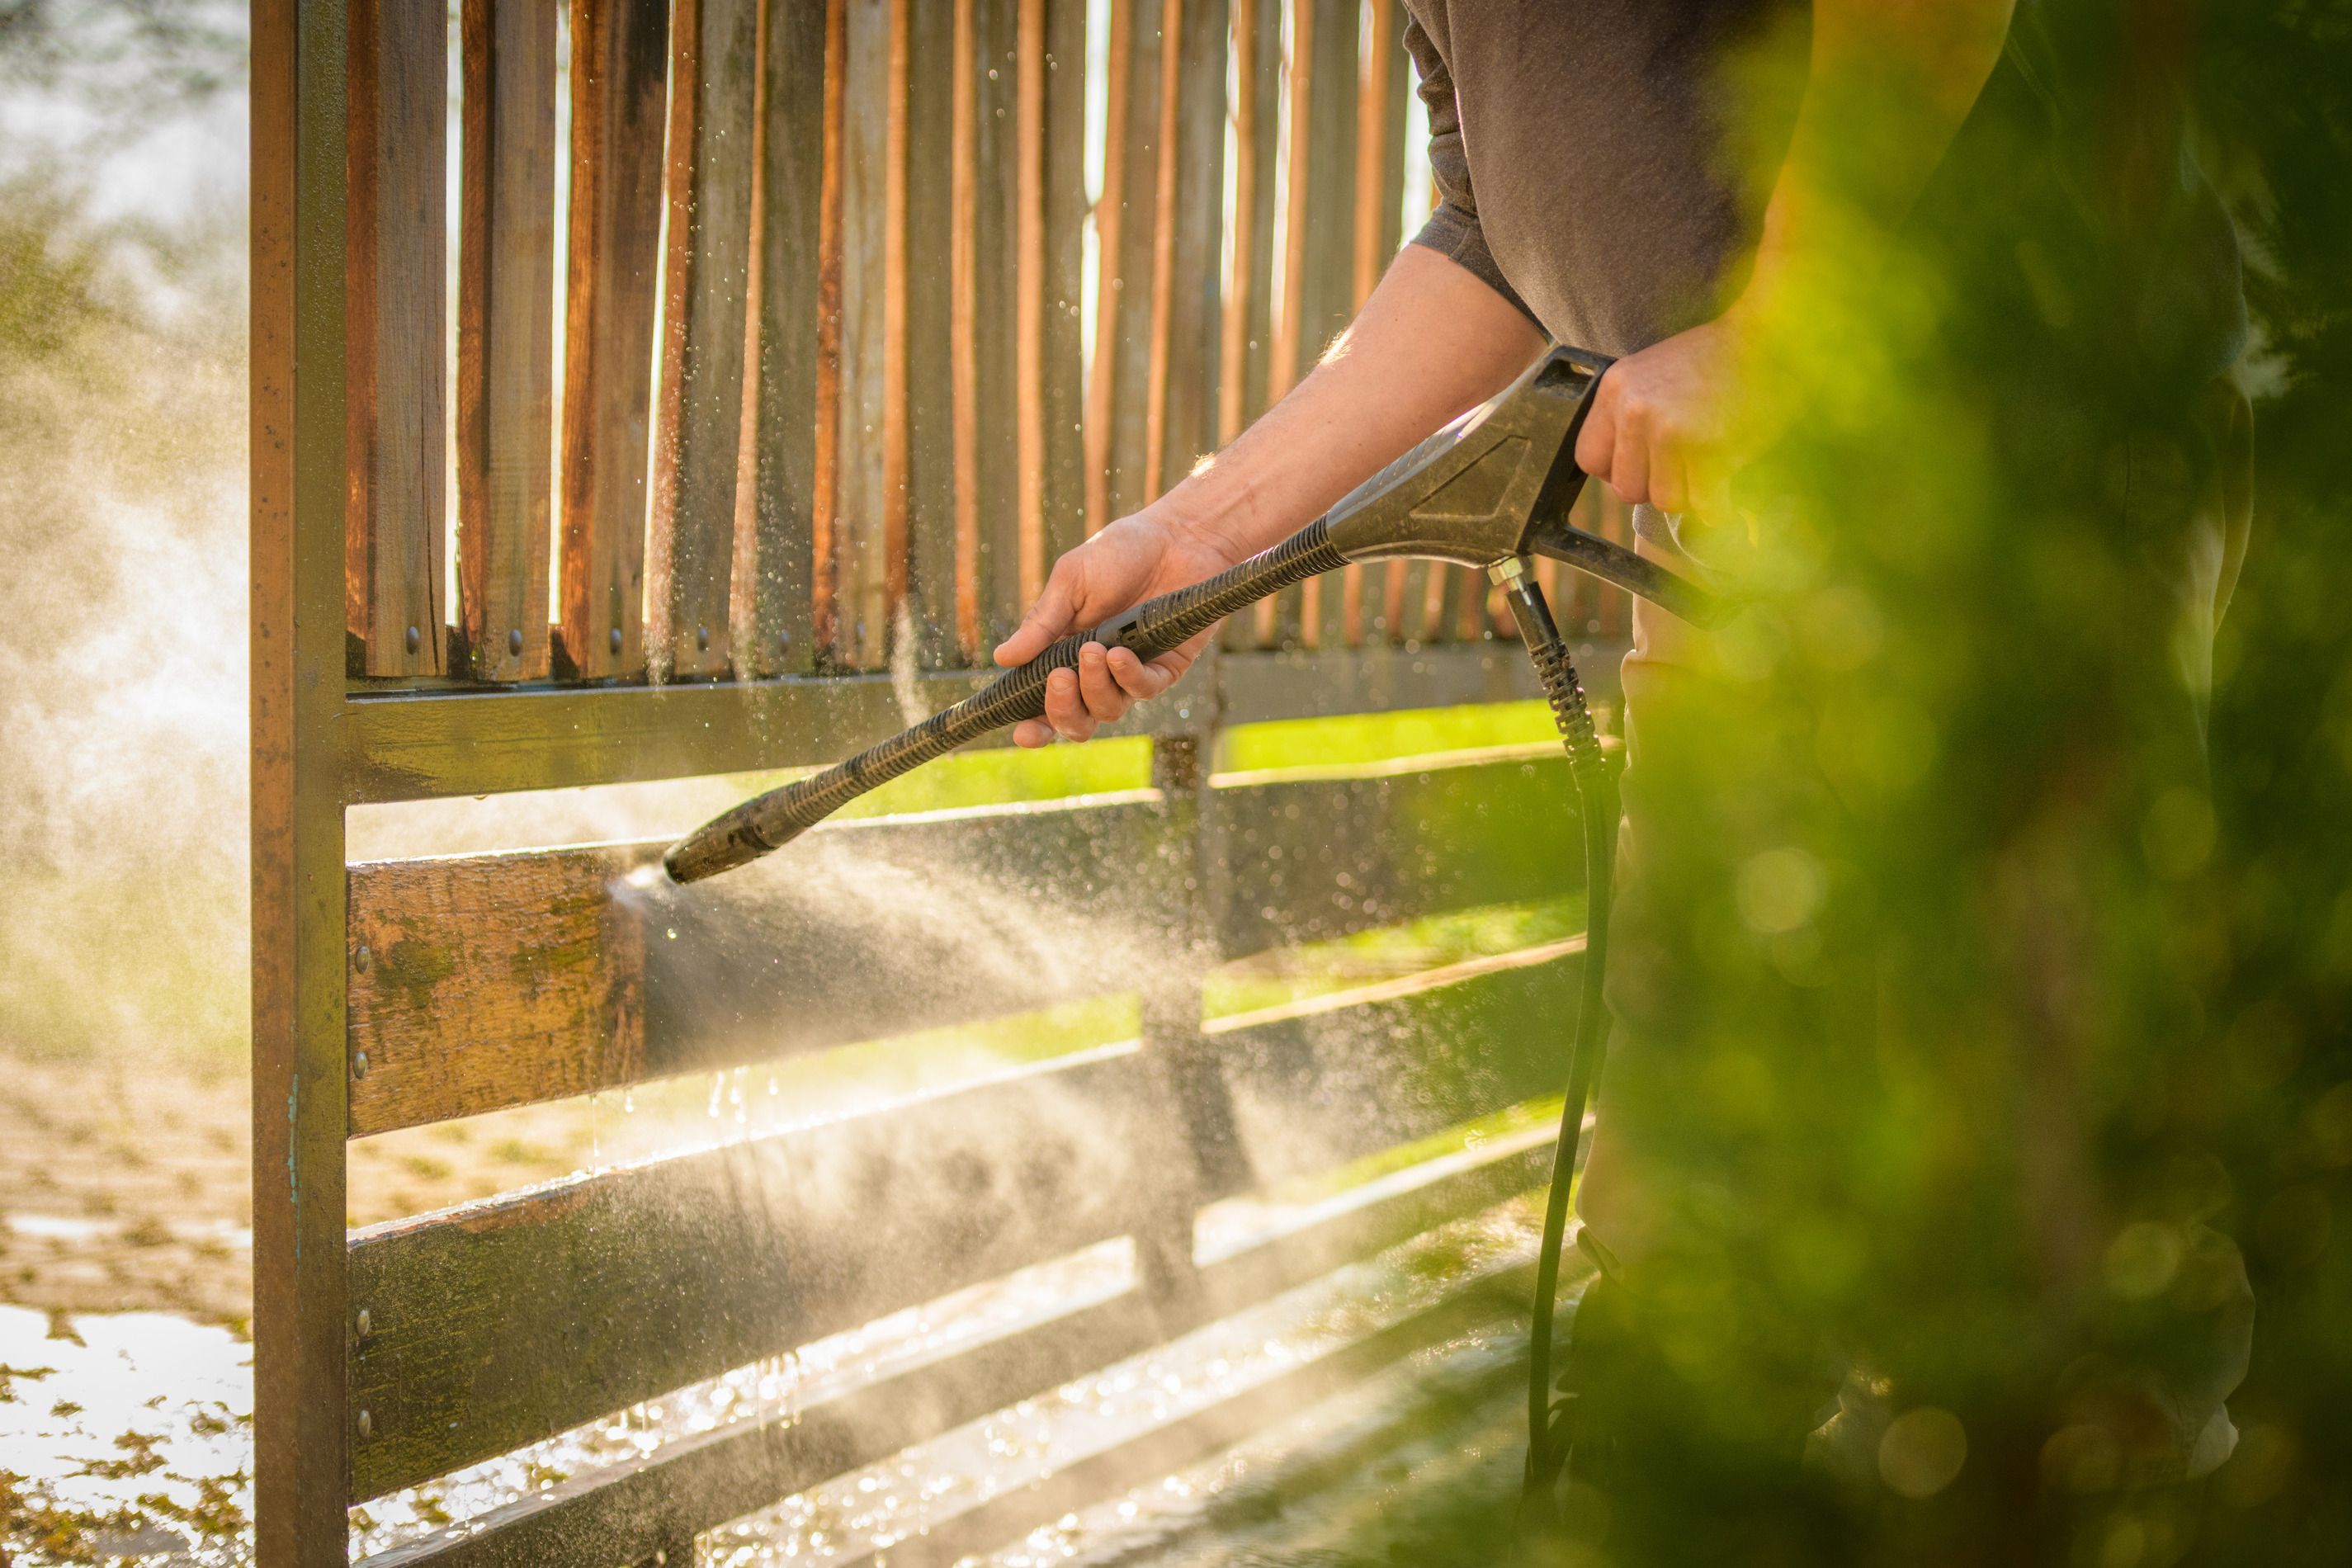 Man cleaning a fence using a pressur washer